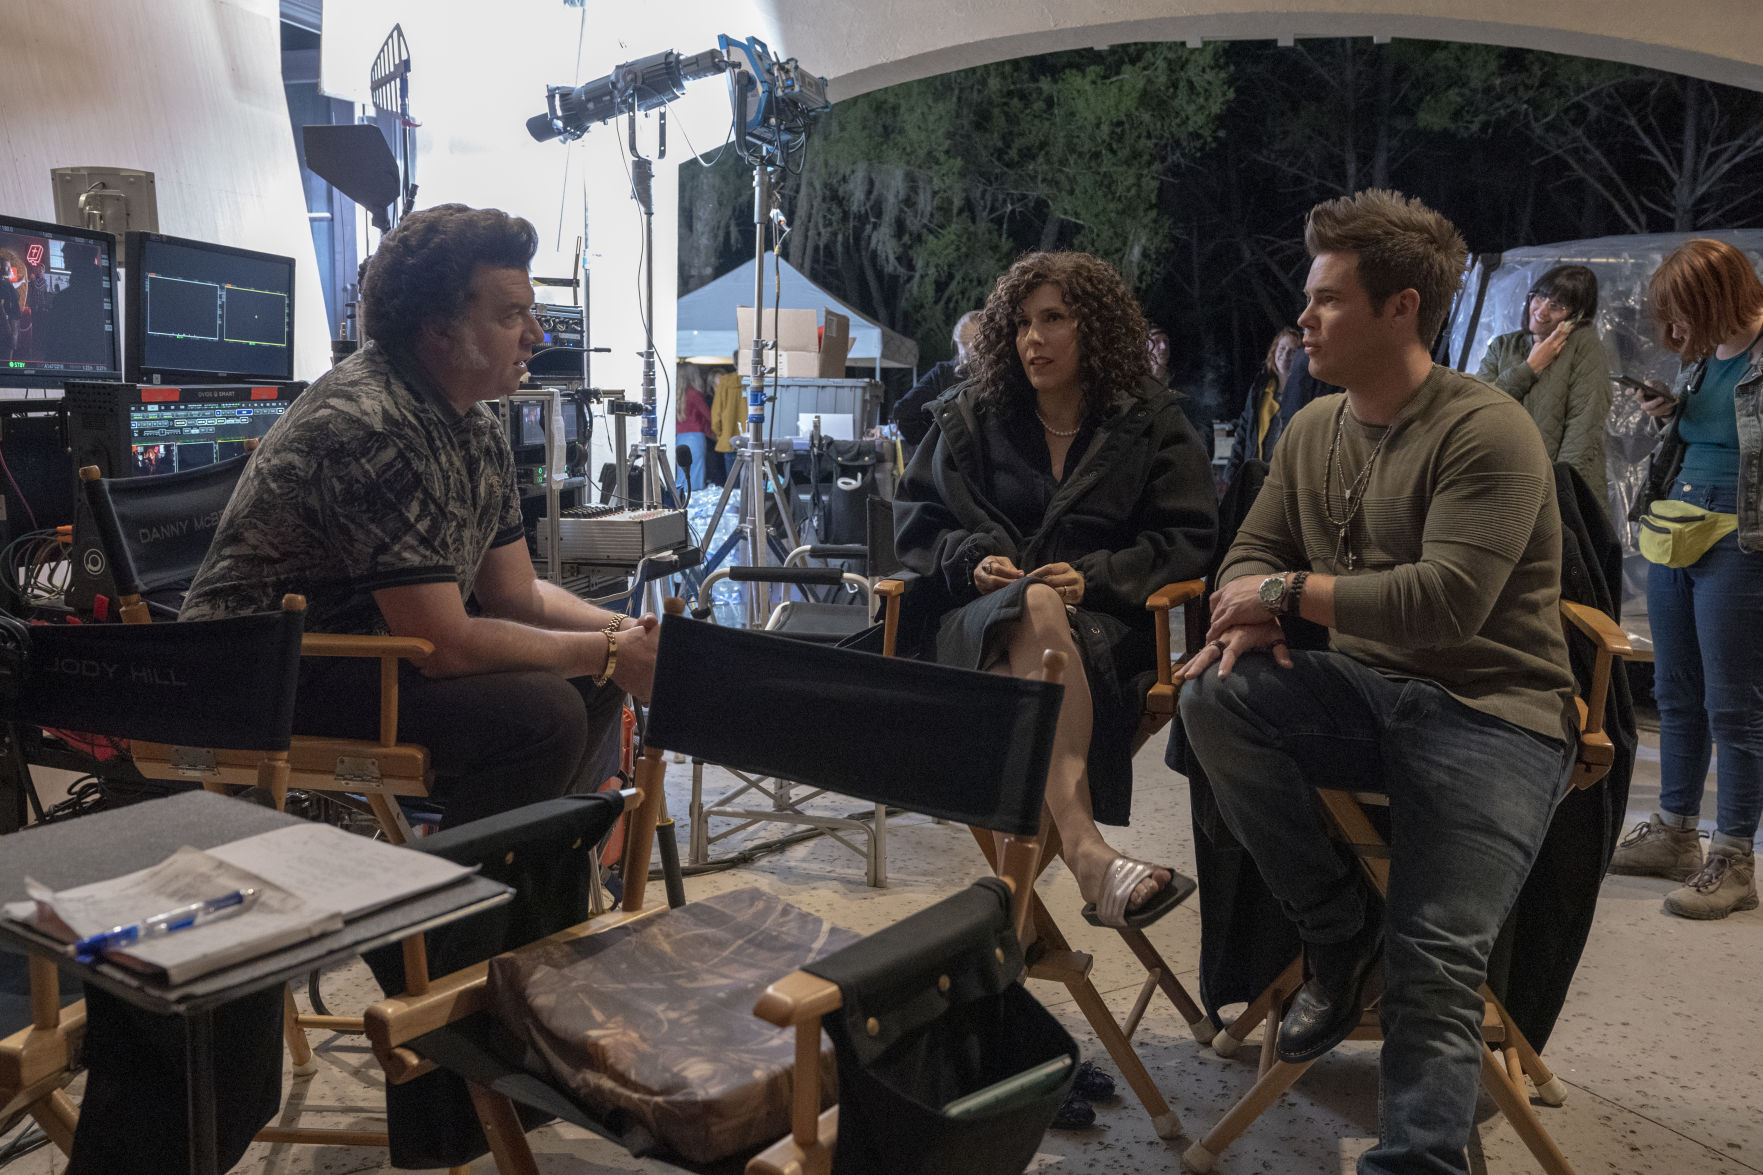 Danny McBride (R) sits with Adam DeVine and Edi Patterson on the set for The Righteous Gemstones. Image © HBO